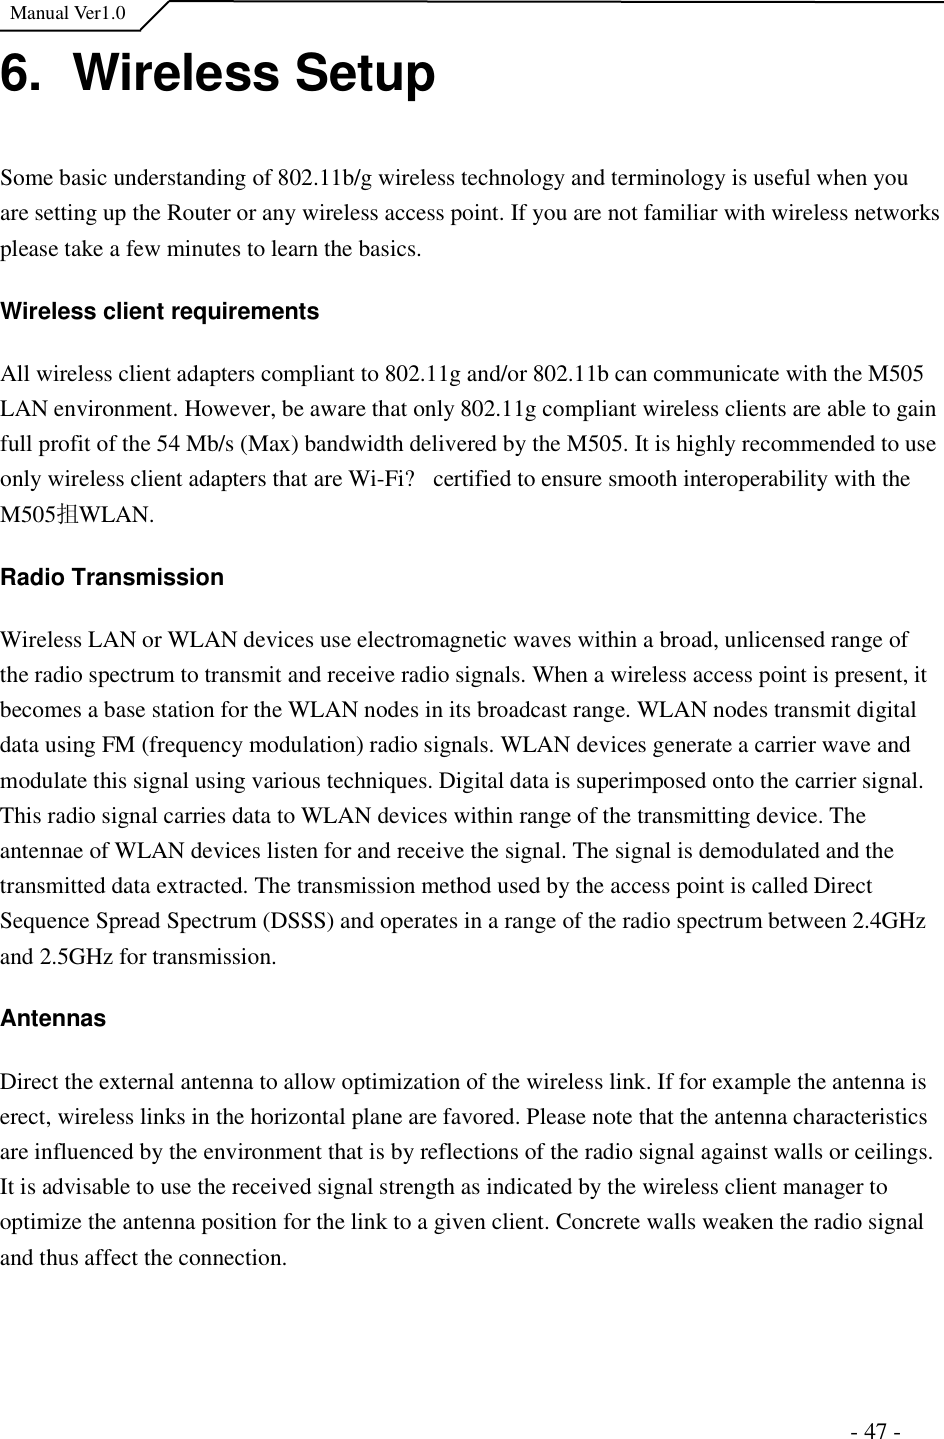  Manual Ver1.0 6.  Wireless Setup Some basic understanding of 802.11b/g wireless technology and terminology is useful when you are setting up the Router or any wireless access point. If you are not familiar with wireless networks please take a few minutes to learn the basics.  Wireless client requirements All wireless client adapters compliant to 802.11g and/or 802.11b can communicate with the M505 LAN environment. However, be aware that only 802.11g compliant wireless clients are able to gain full profit of the 54 Mb/s (Max) bandwidth delivered by the M505. It is highly recommended to use only wireless client adapters that are Wi-Fi?certified to ensure smooth interoperability with the M505抯 WLAN.  Radio Transmission Wireless LAN or WLAN devices use electromagnetic waves within a broad, unlicensed range of the radio spectrum to transmit and receive radio signals. When a wireless access point is present, it becomes a base station for the WLAN nodes in its broadcast range. WLAN nodes transmit digital data using FM (frequency modulation) radio signals. WLAN devices generate a carrier wave and modulate this signal using various techniques. Digital data is superimposed onto the carrier signal. This radio signal carries data to WLAN devices within range of the transmitting device. The antennae of WLAN devices listen for and receive the signal. The signal is demodulated and the transmitted data extracted. The transmission method used by the access point is called Direct Sequence Spread Spectrum (DSSS) and operates in a range of the radio spectrum between 2.4GHz and 2.5GHz for transmission.  AntennasDirect the external antenna to allow optimization of the wireless link. If for example the antenna is erect, wireless links in the horizontal plane are favored. Please note that the antenna characteristics are influenced by the environment that is by reflections of the radio signal against walls or ceilings. It is advisable to use the received signal strength as indicated by the wireless client manager to optimize the antenna position for the link to a given client. Concrete walls weaken the radio signal and thus affect the connection.                                                                       - 47 - 